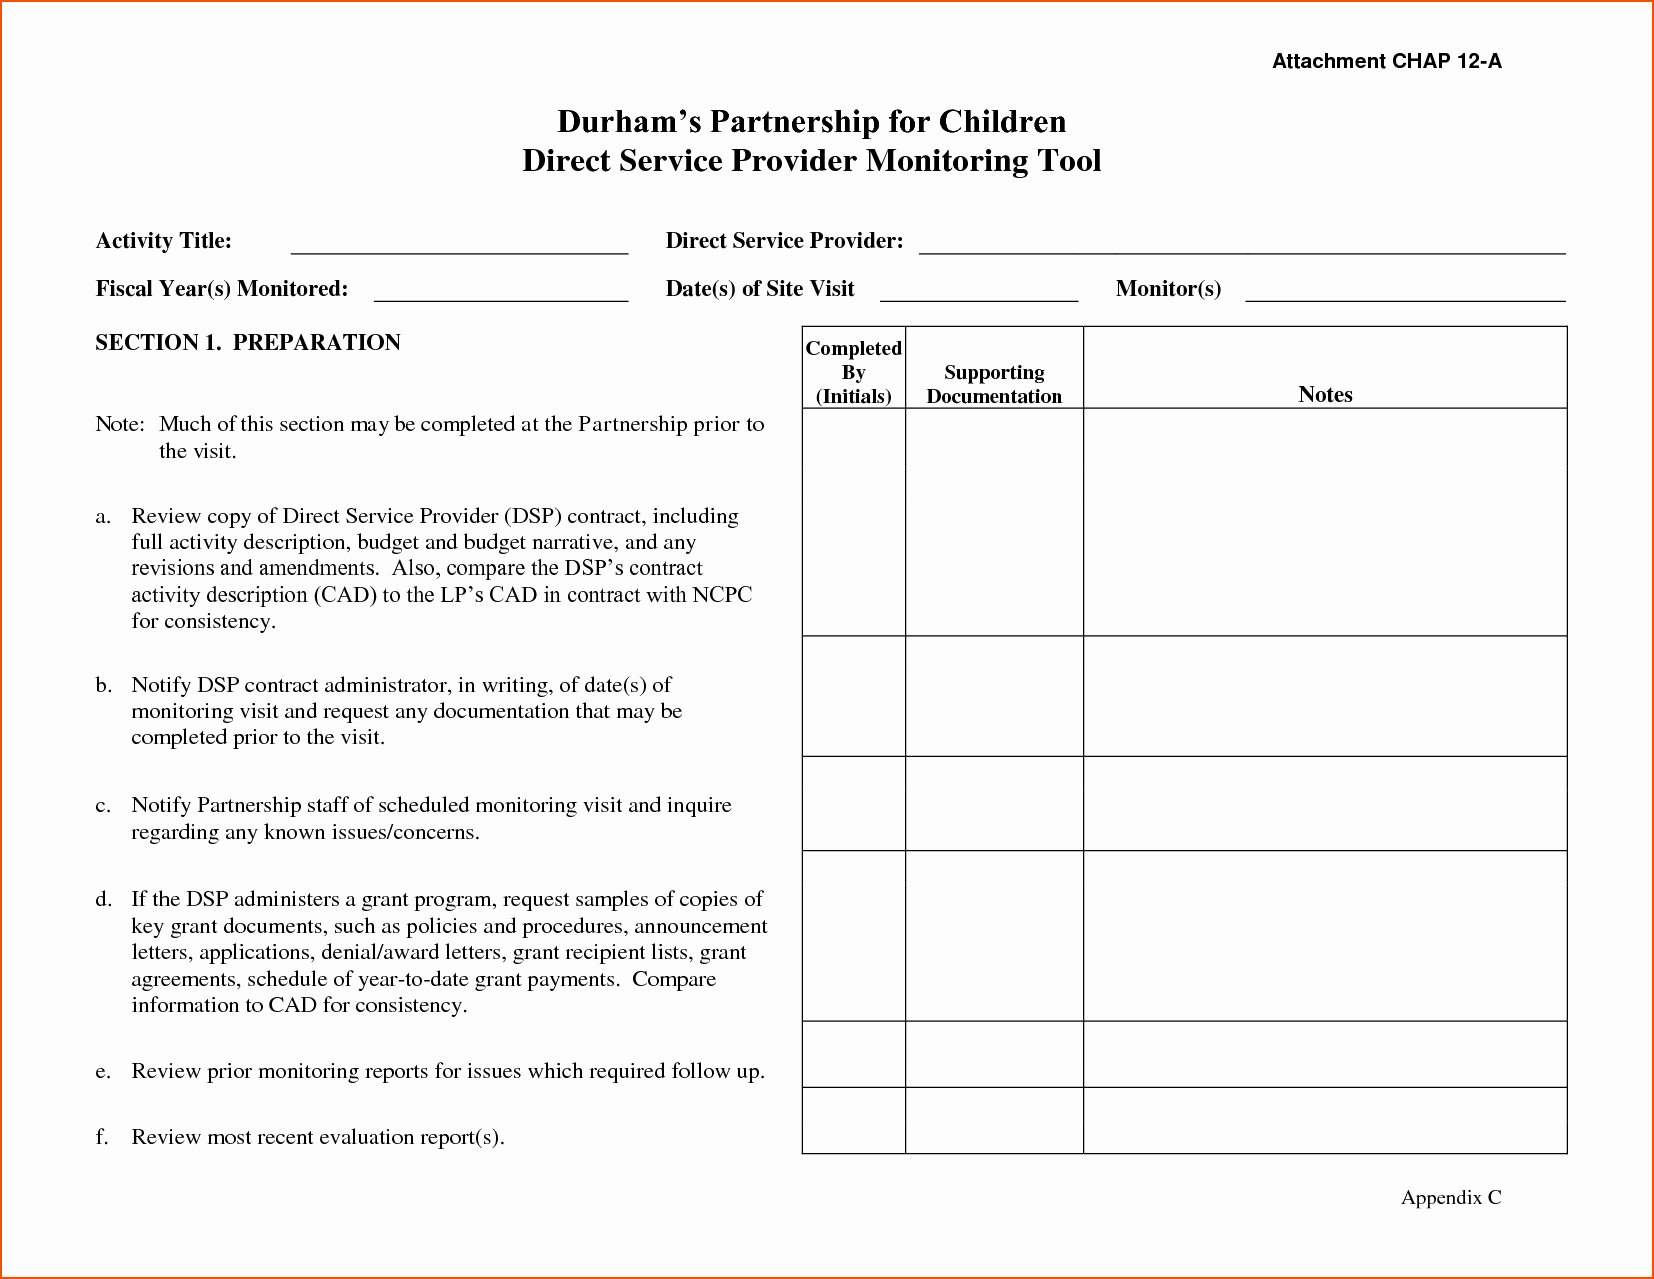 045 Daily Activity Report Template Ideas Weekly For Daily Activity Report Template